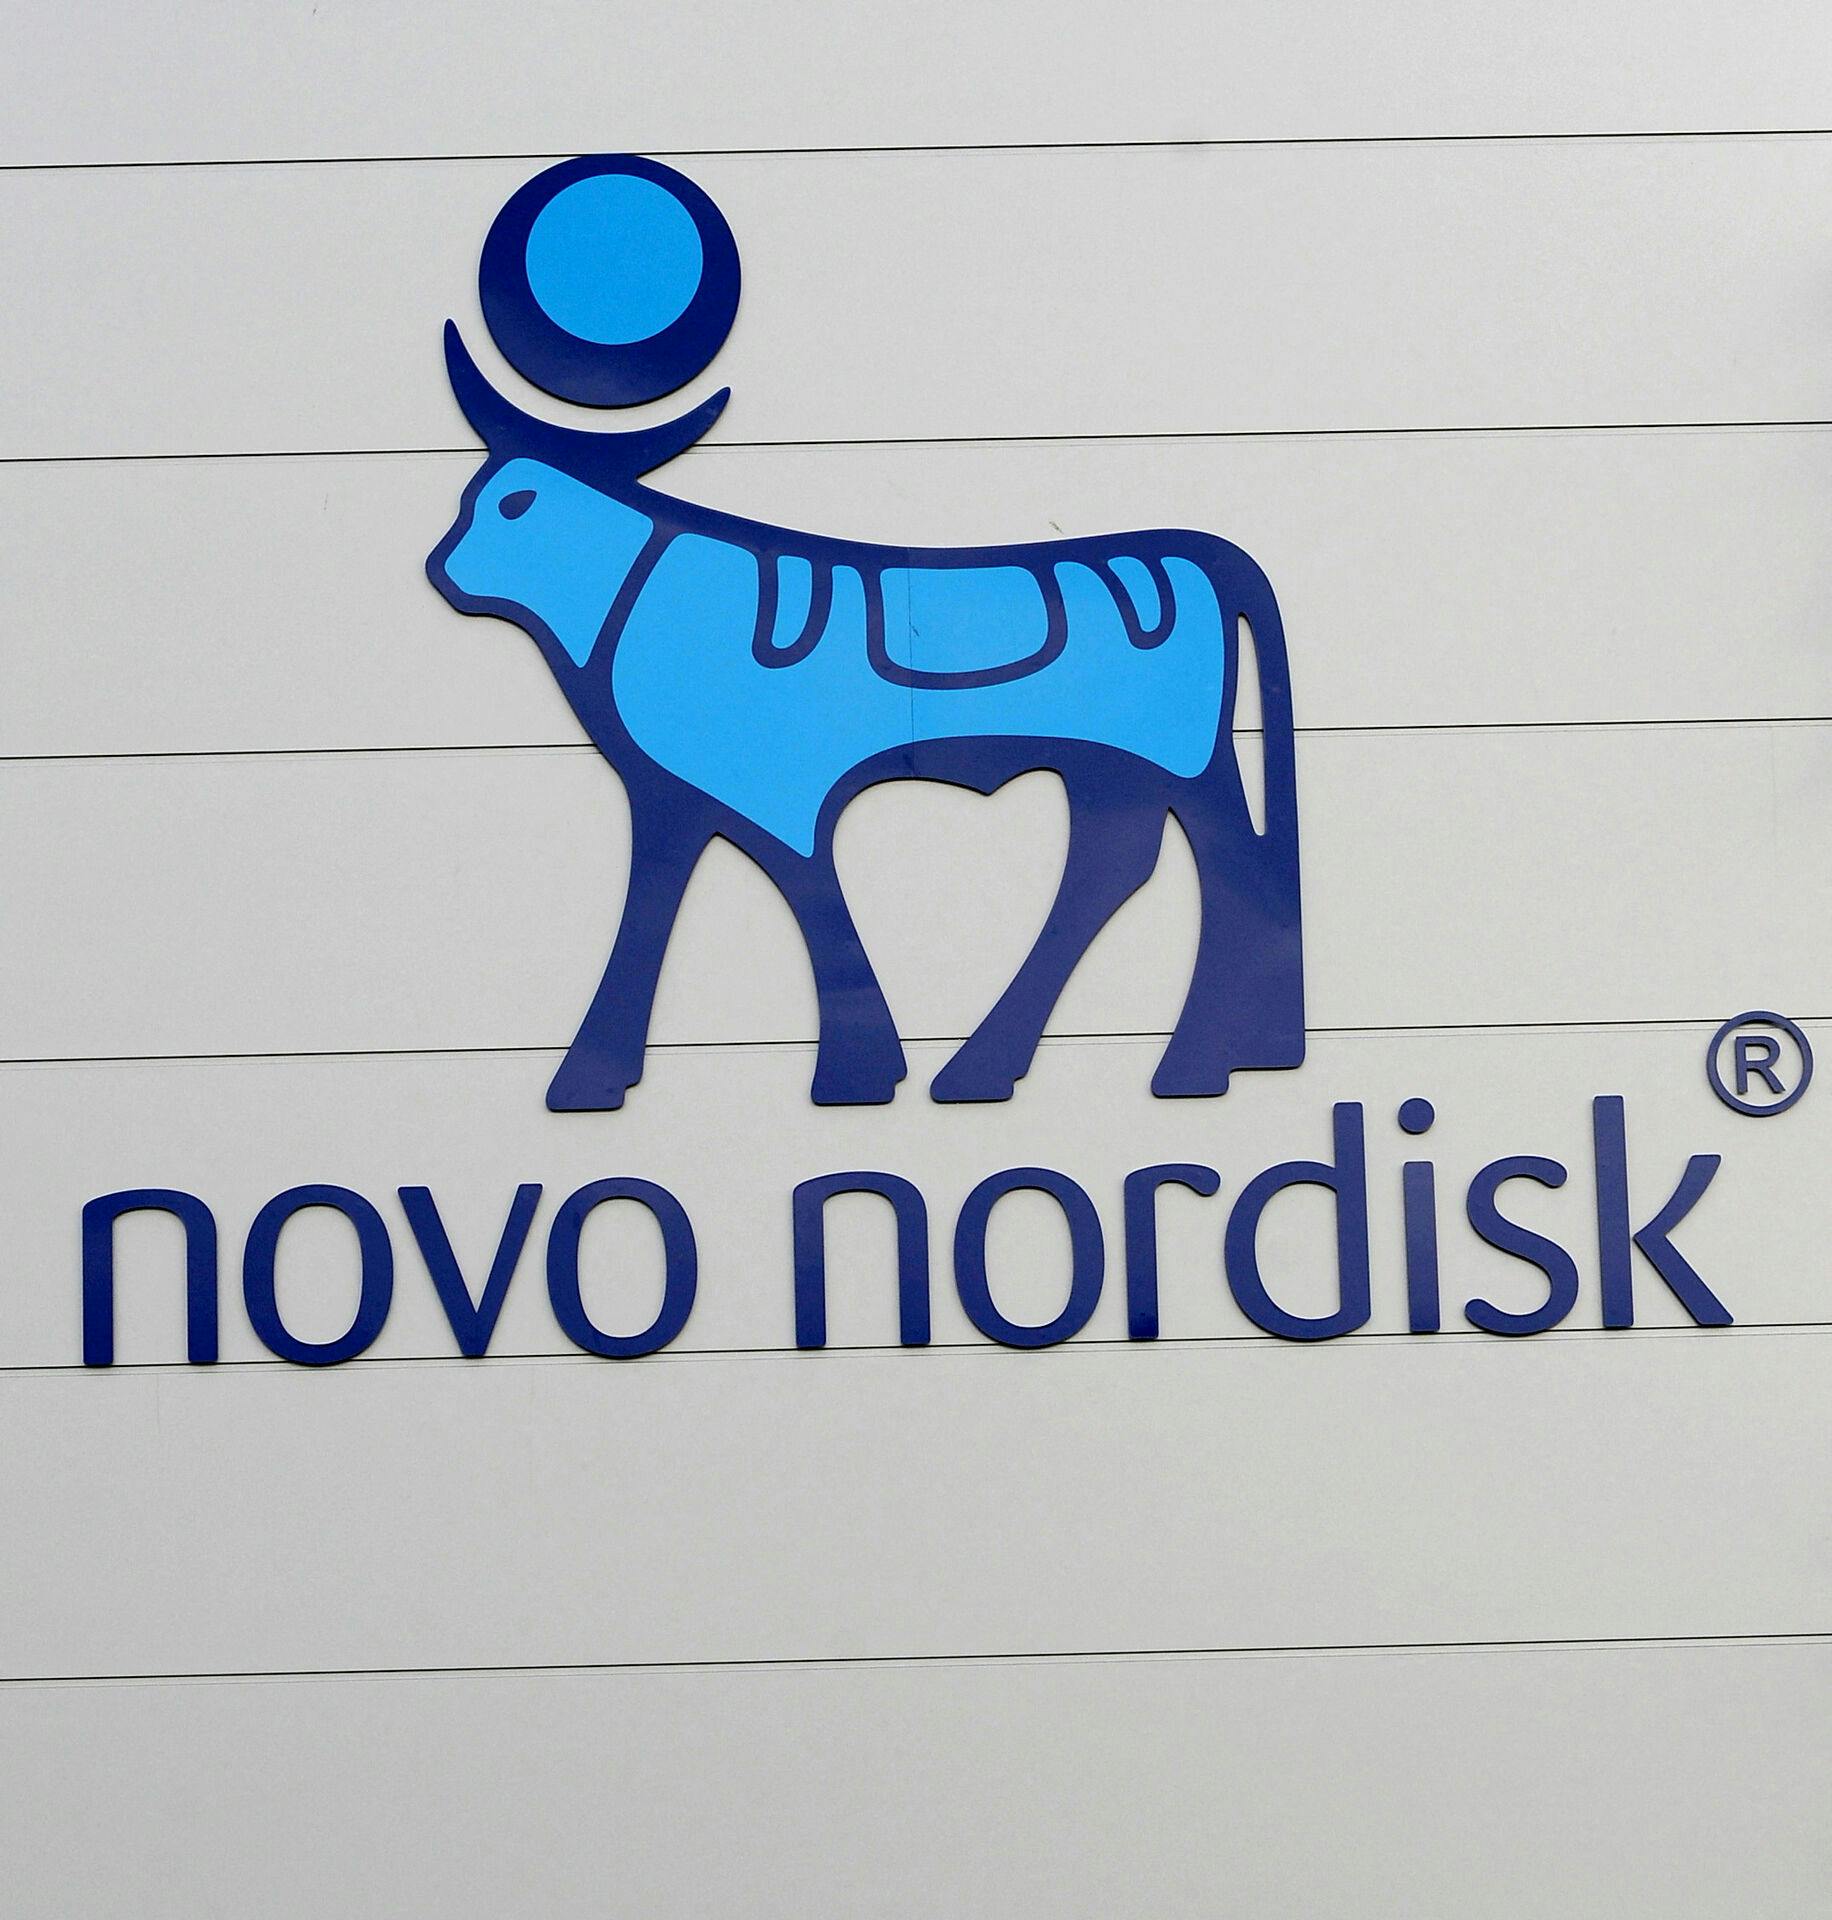 FILE PHOTO: The logo of Danish multinational pharmaceutical company Novo Nordisk is pictured on the facade of a production plant in Chartres, north-central France, April 21, 2016. REUTERS/Guillaume Souvant//File Photo